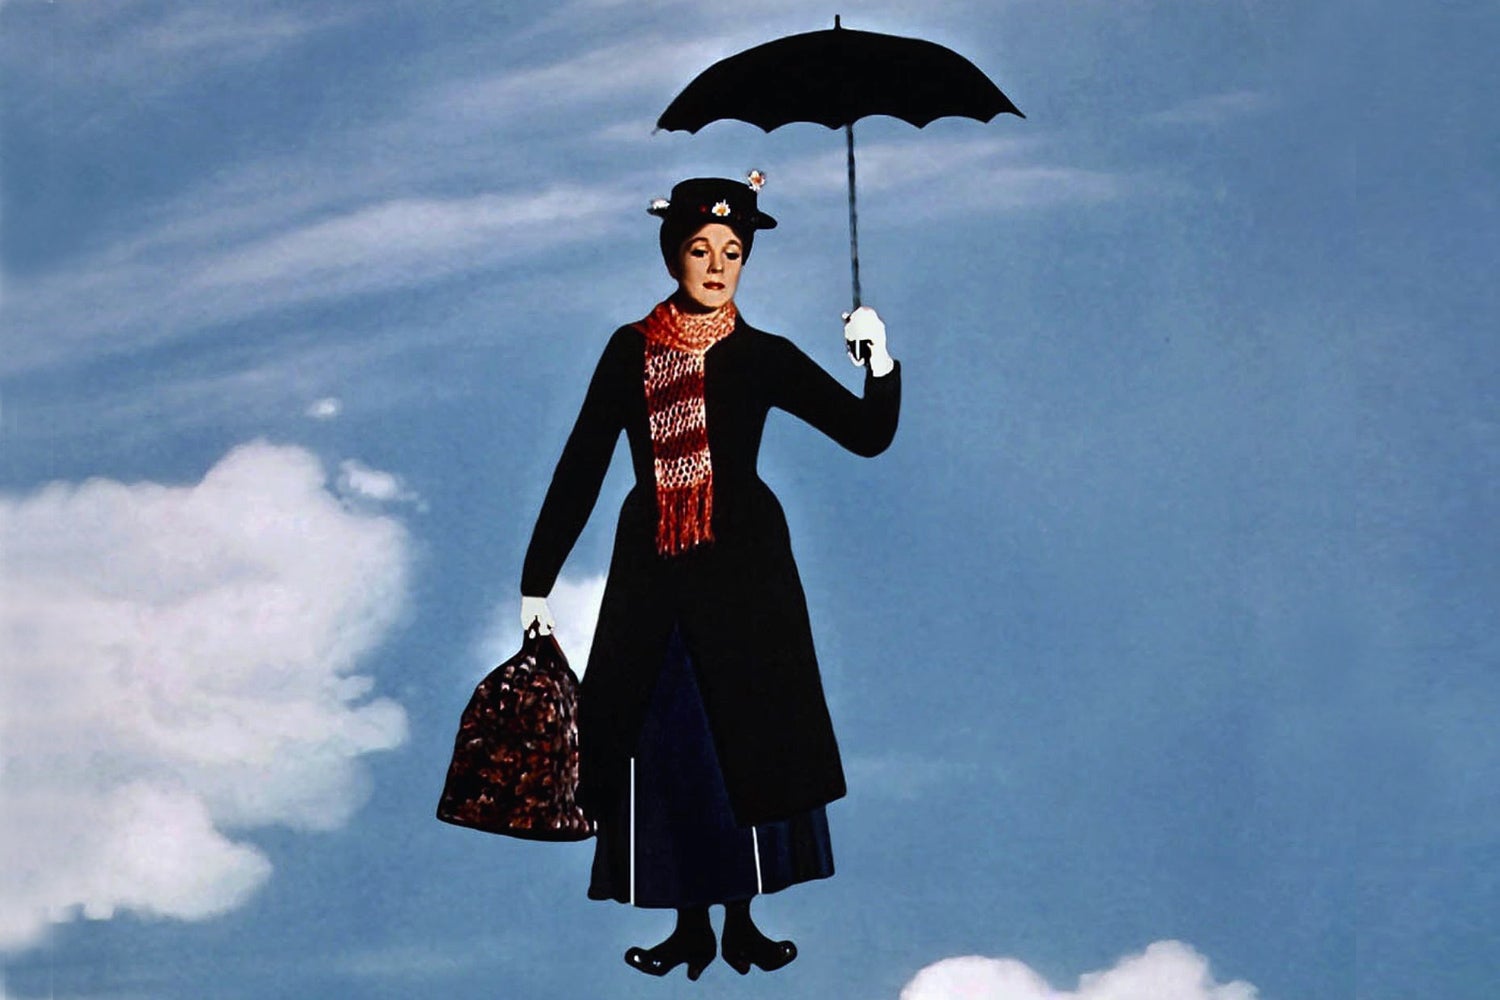 mary poppins age rating raised to pg due to discriminatory language 60 years after release